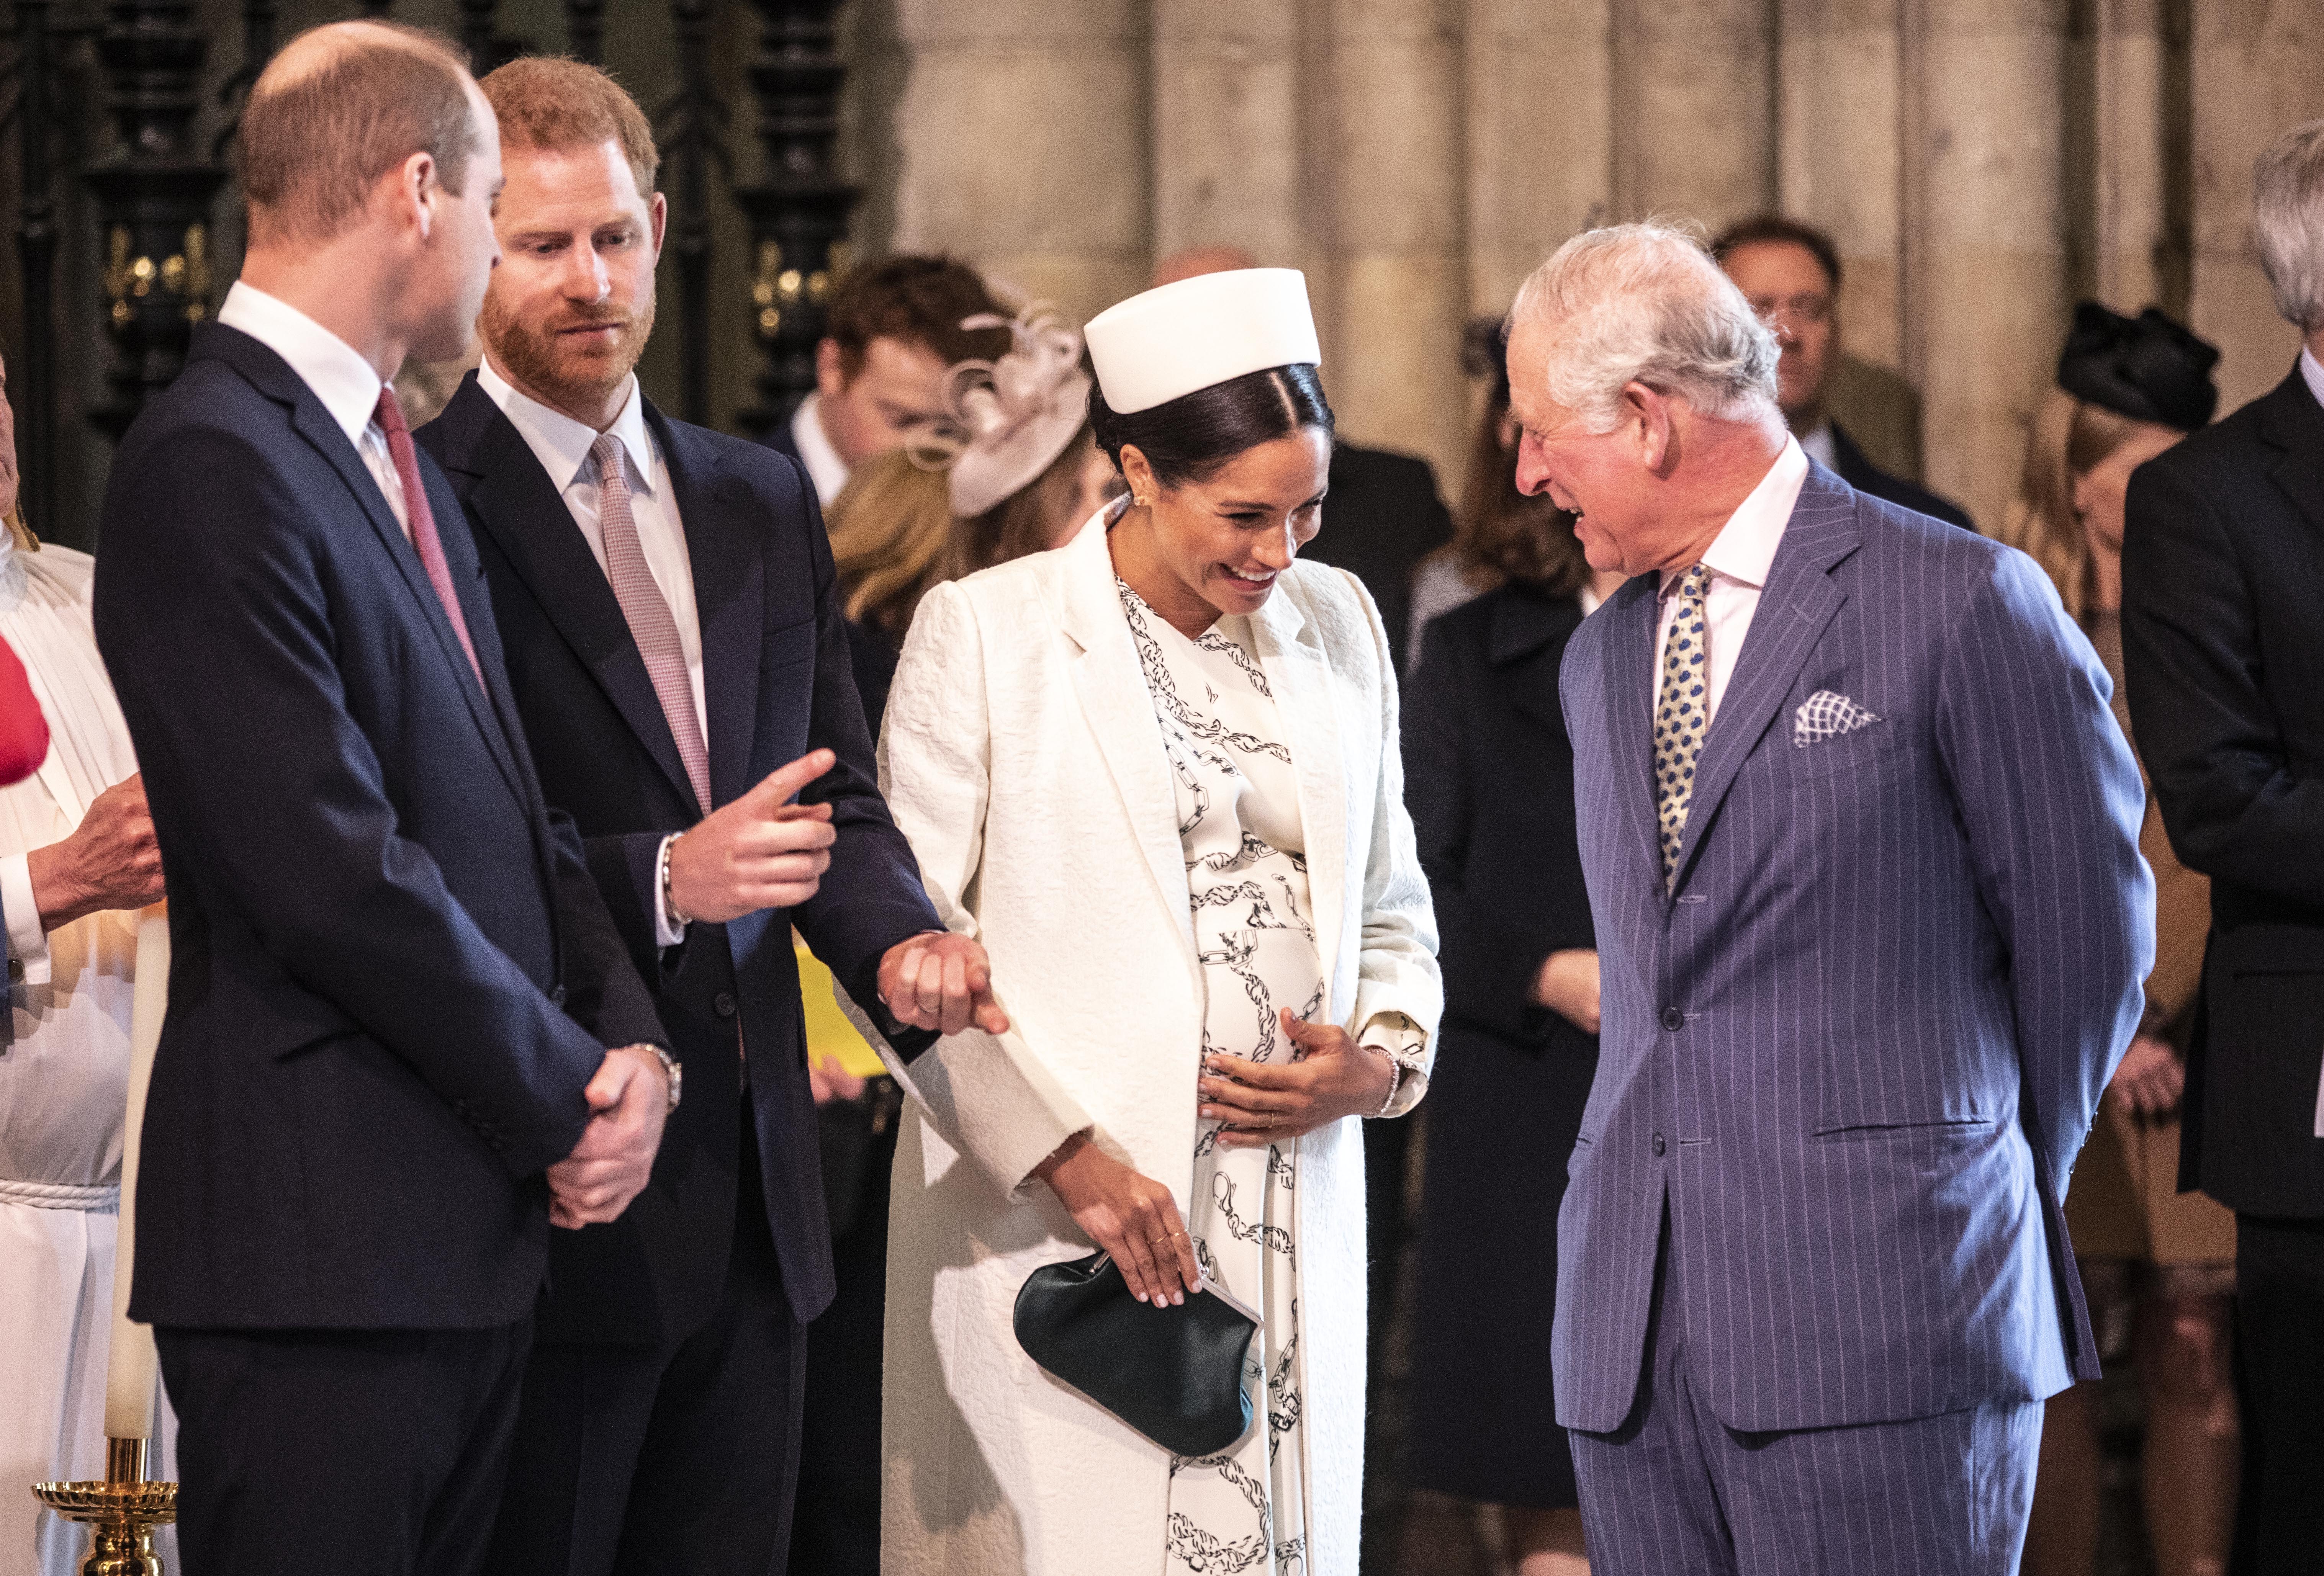 King Charles III, Prince Harry, Prince William and Meghan Markle at Westminster Abbey in 2019. | Source: Getty Images